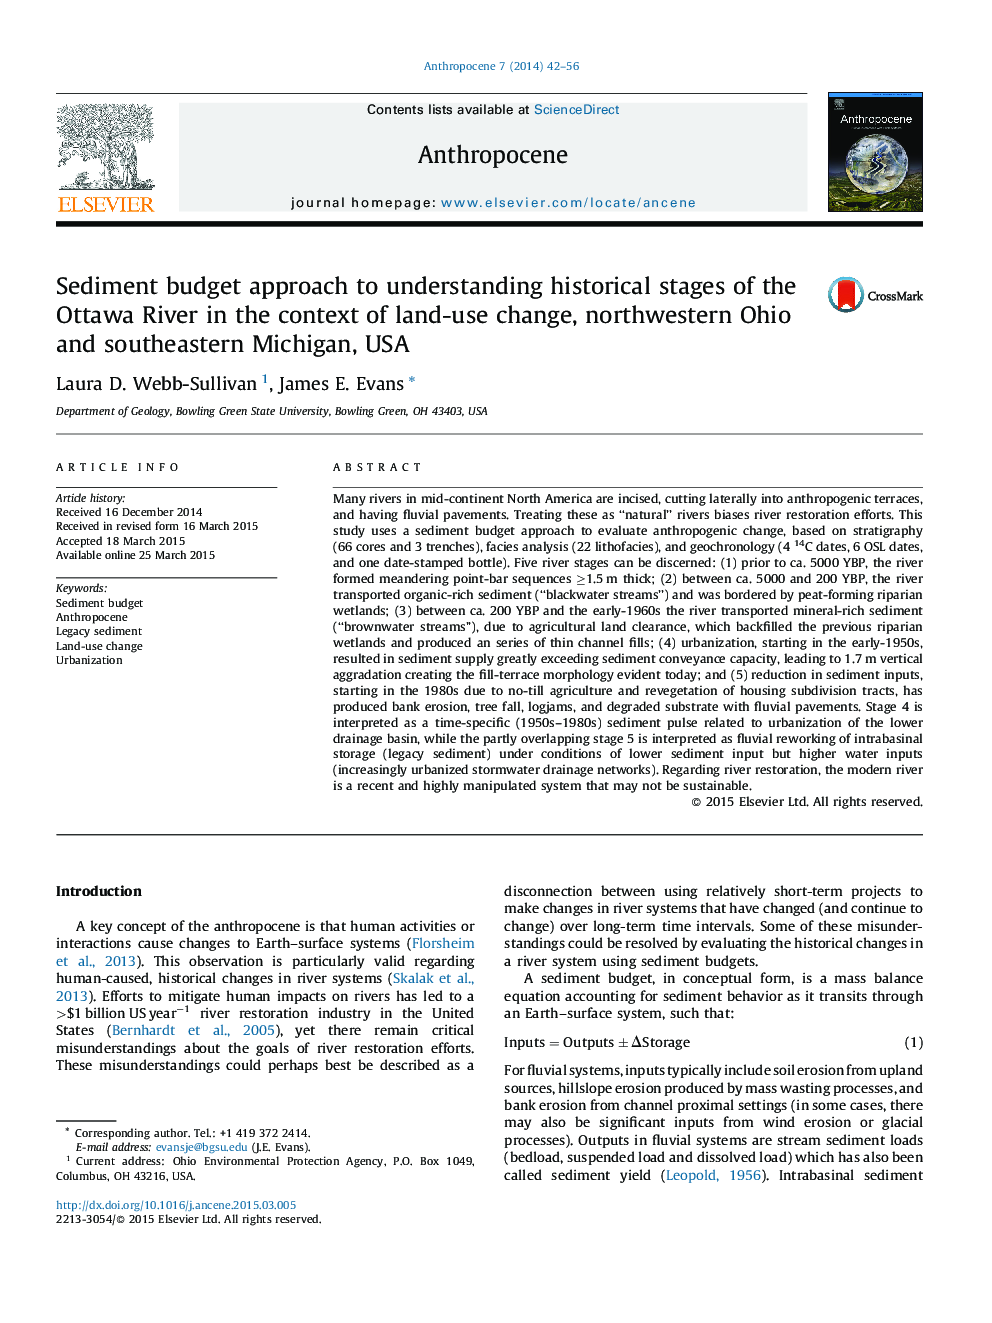 Sediment budget approach to understanding historical stages of the Ottawa River in the context of land-use change, northwestern Ohio and southeastern Michigan, USA